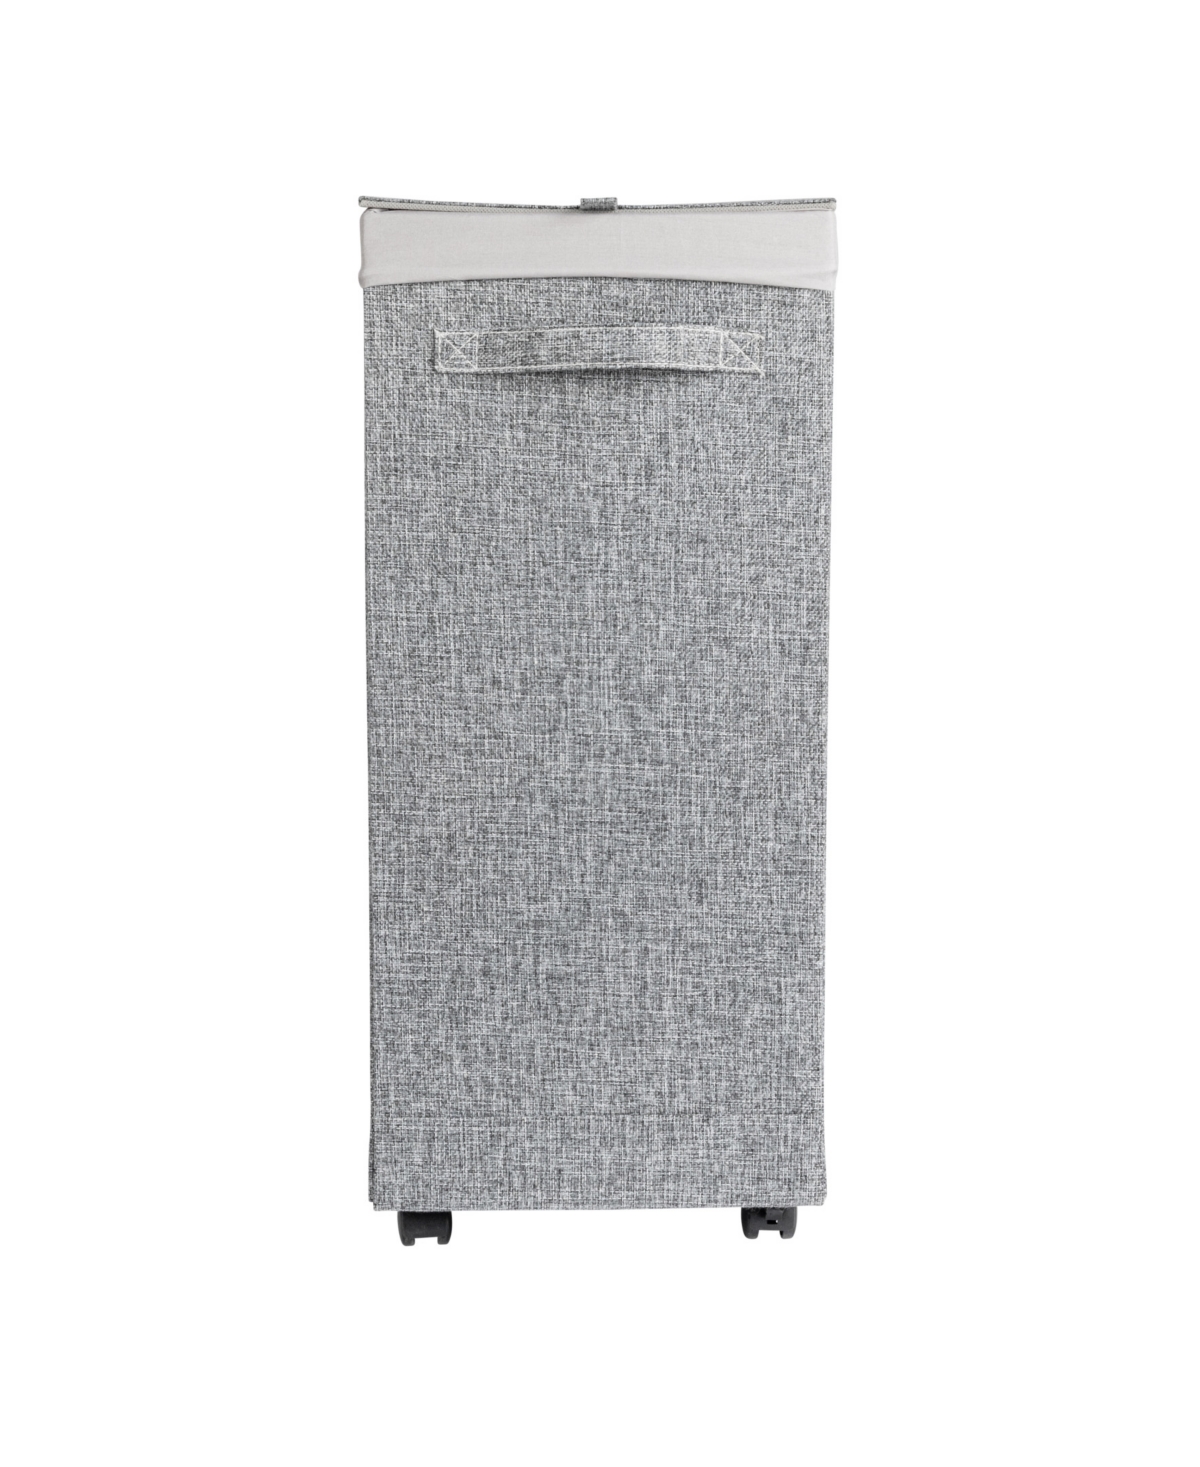 Shop Household Essentials Narrow Collapsible Laundry Hamper With Liner And Lid In Graphite